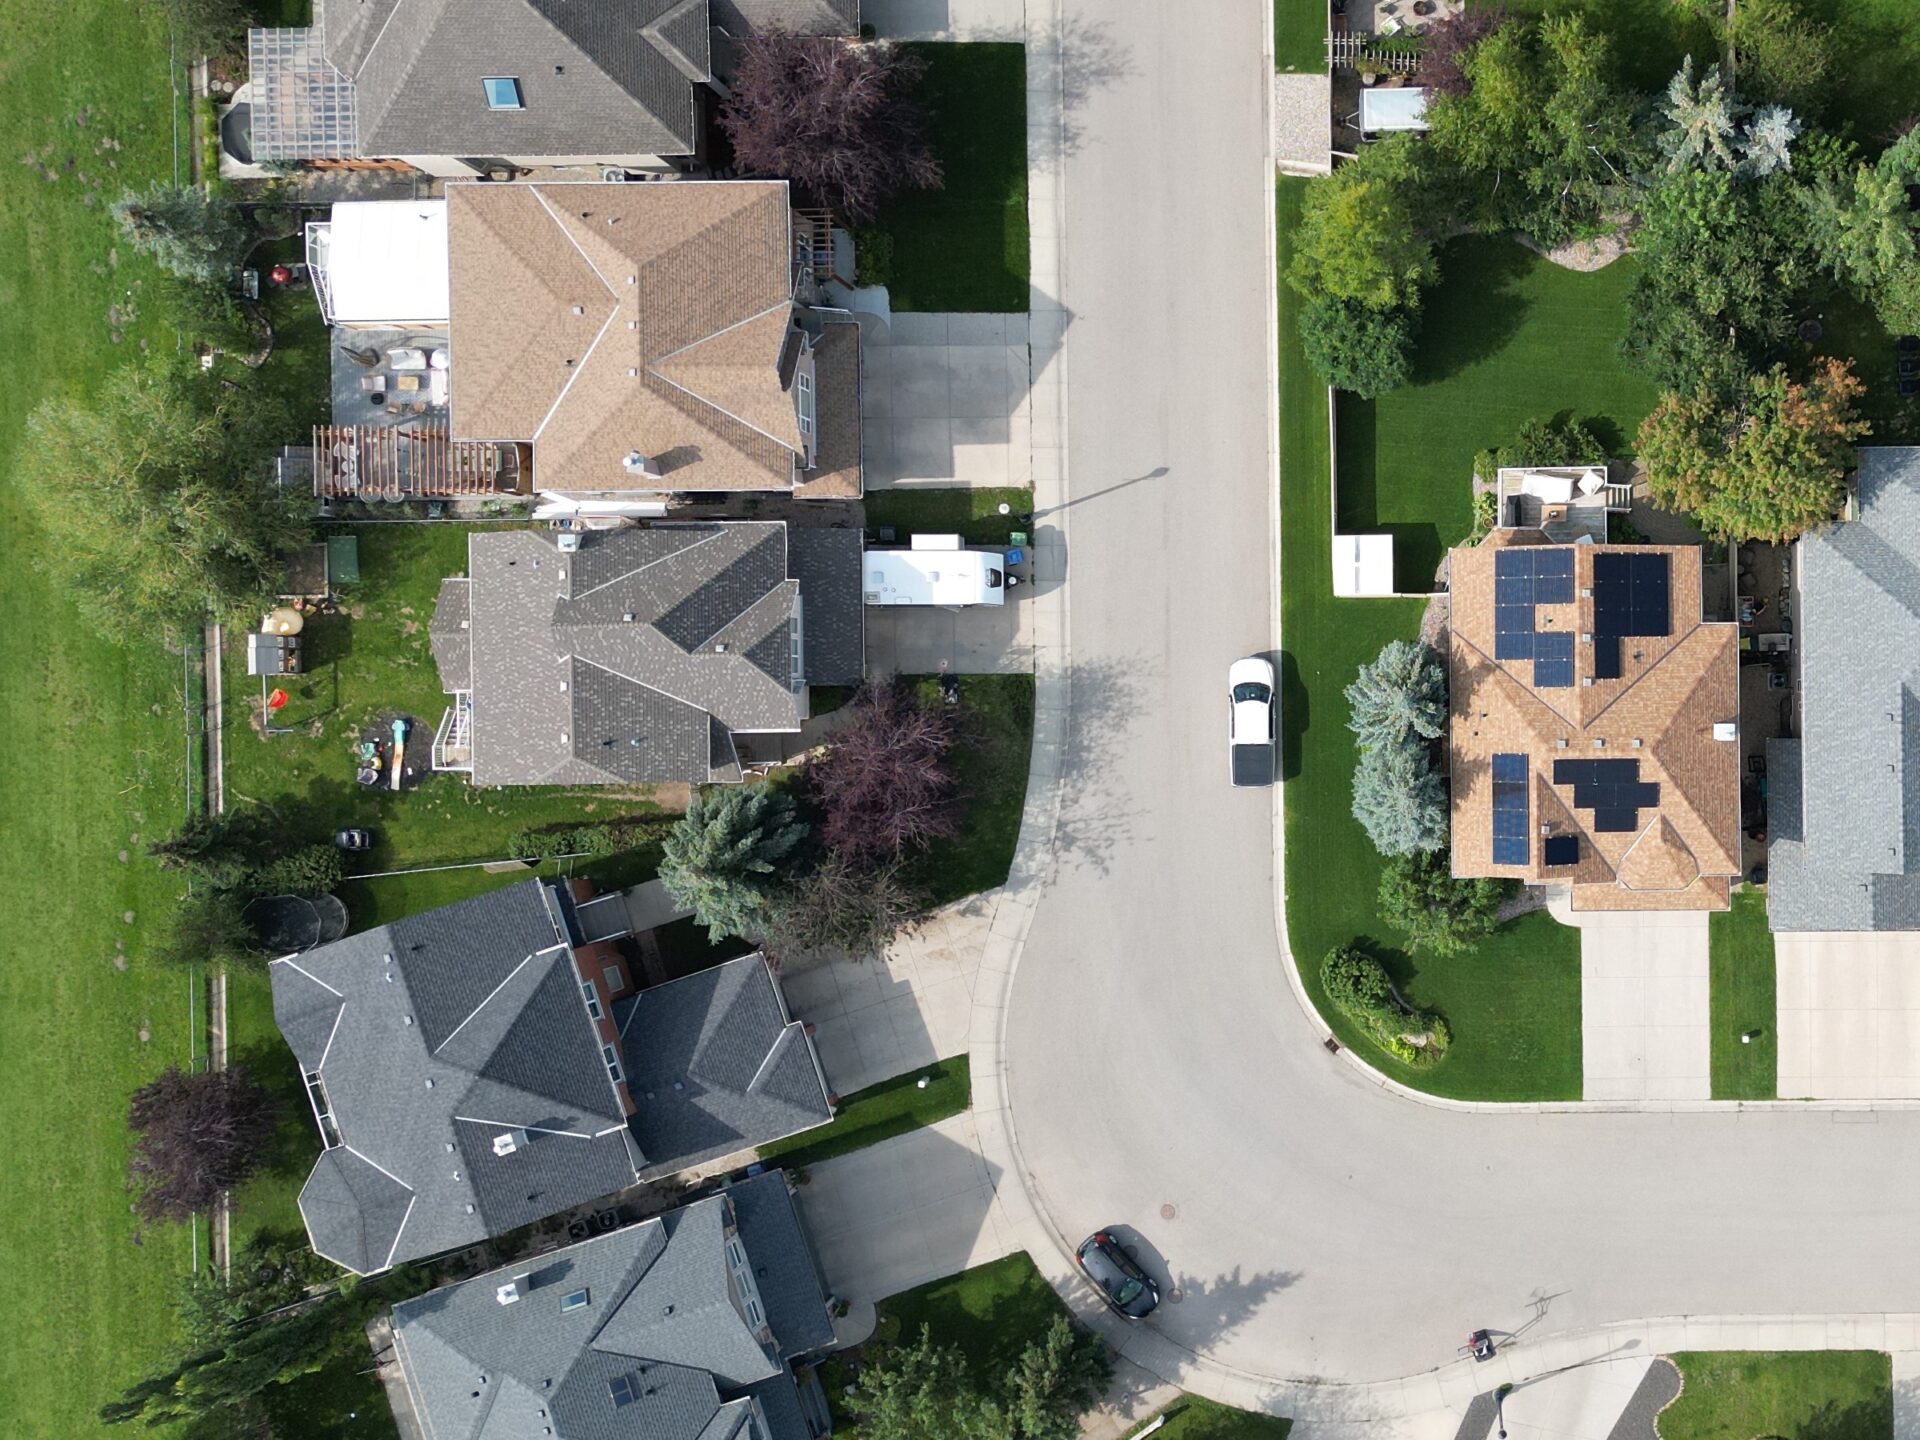 Aerial view of a residential neighborhood with houses, lush green lawns, driveways, vehicles, and a curved street. Solar panels visible on one roof.